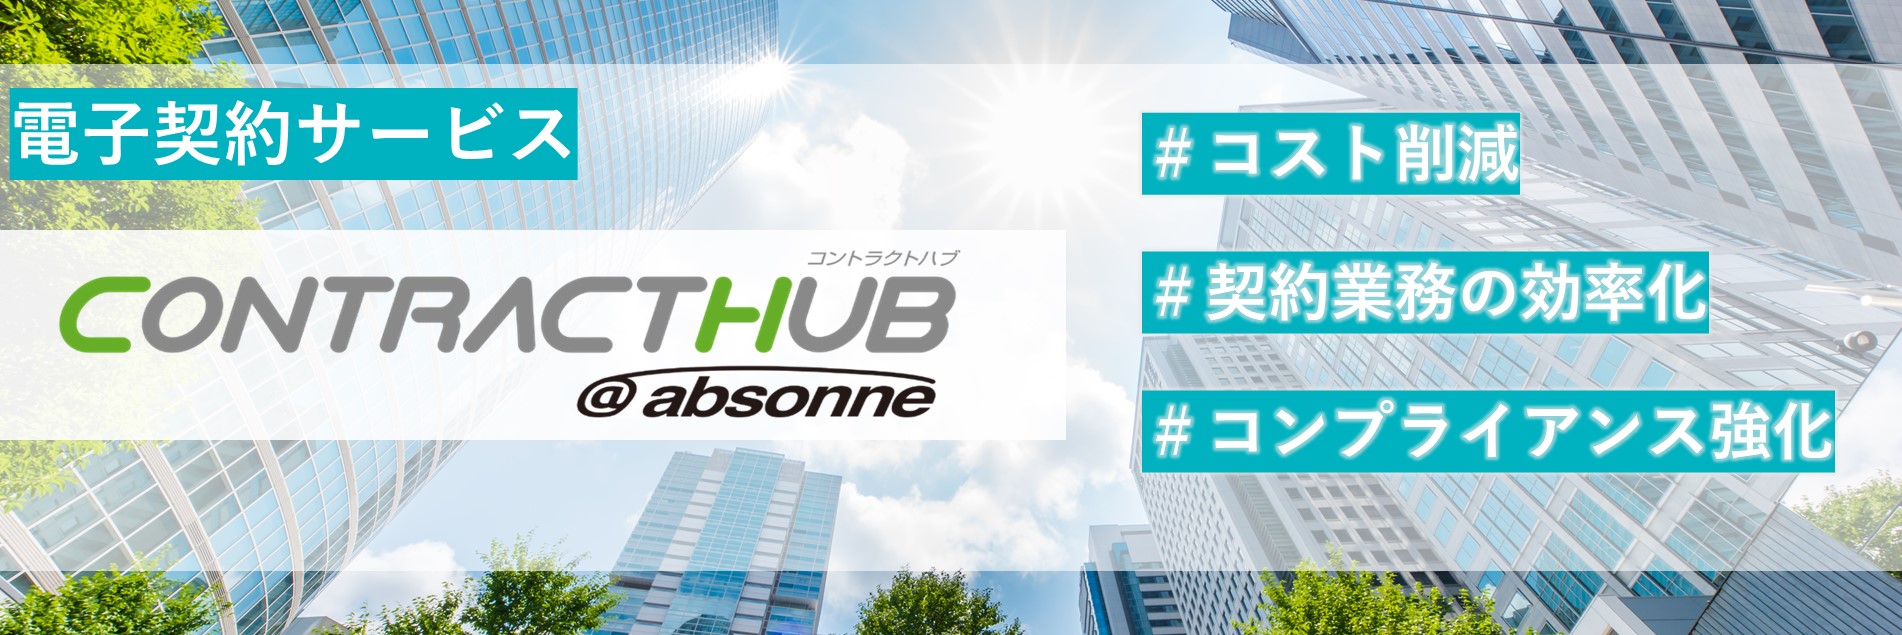 CONTRACTHUB@absonne トップ画像